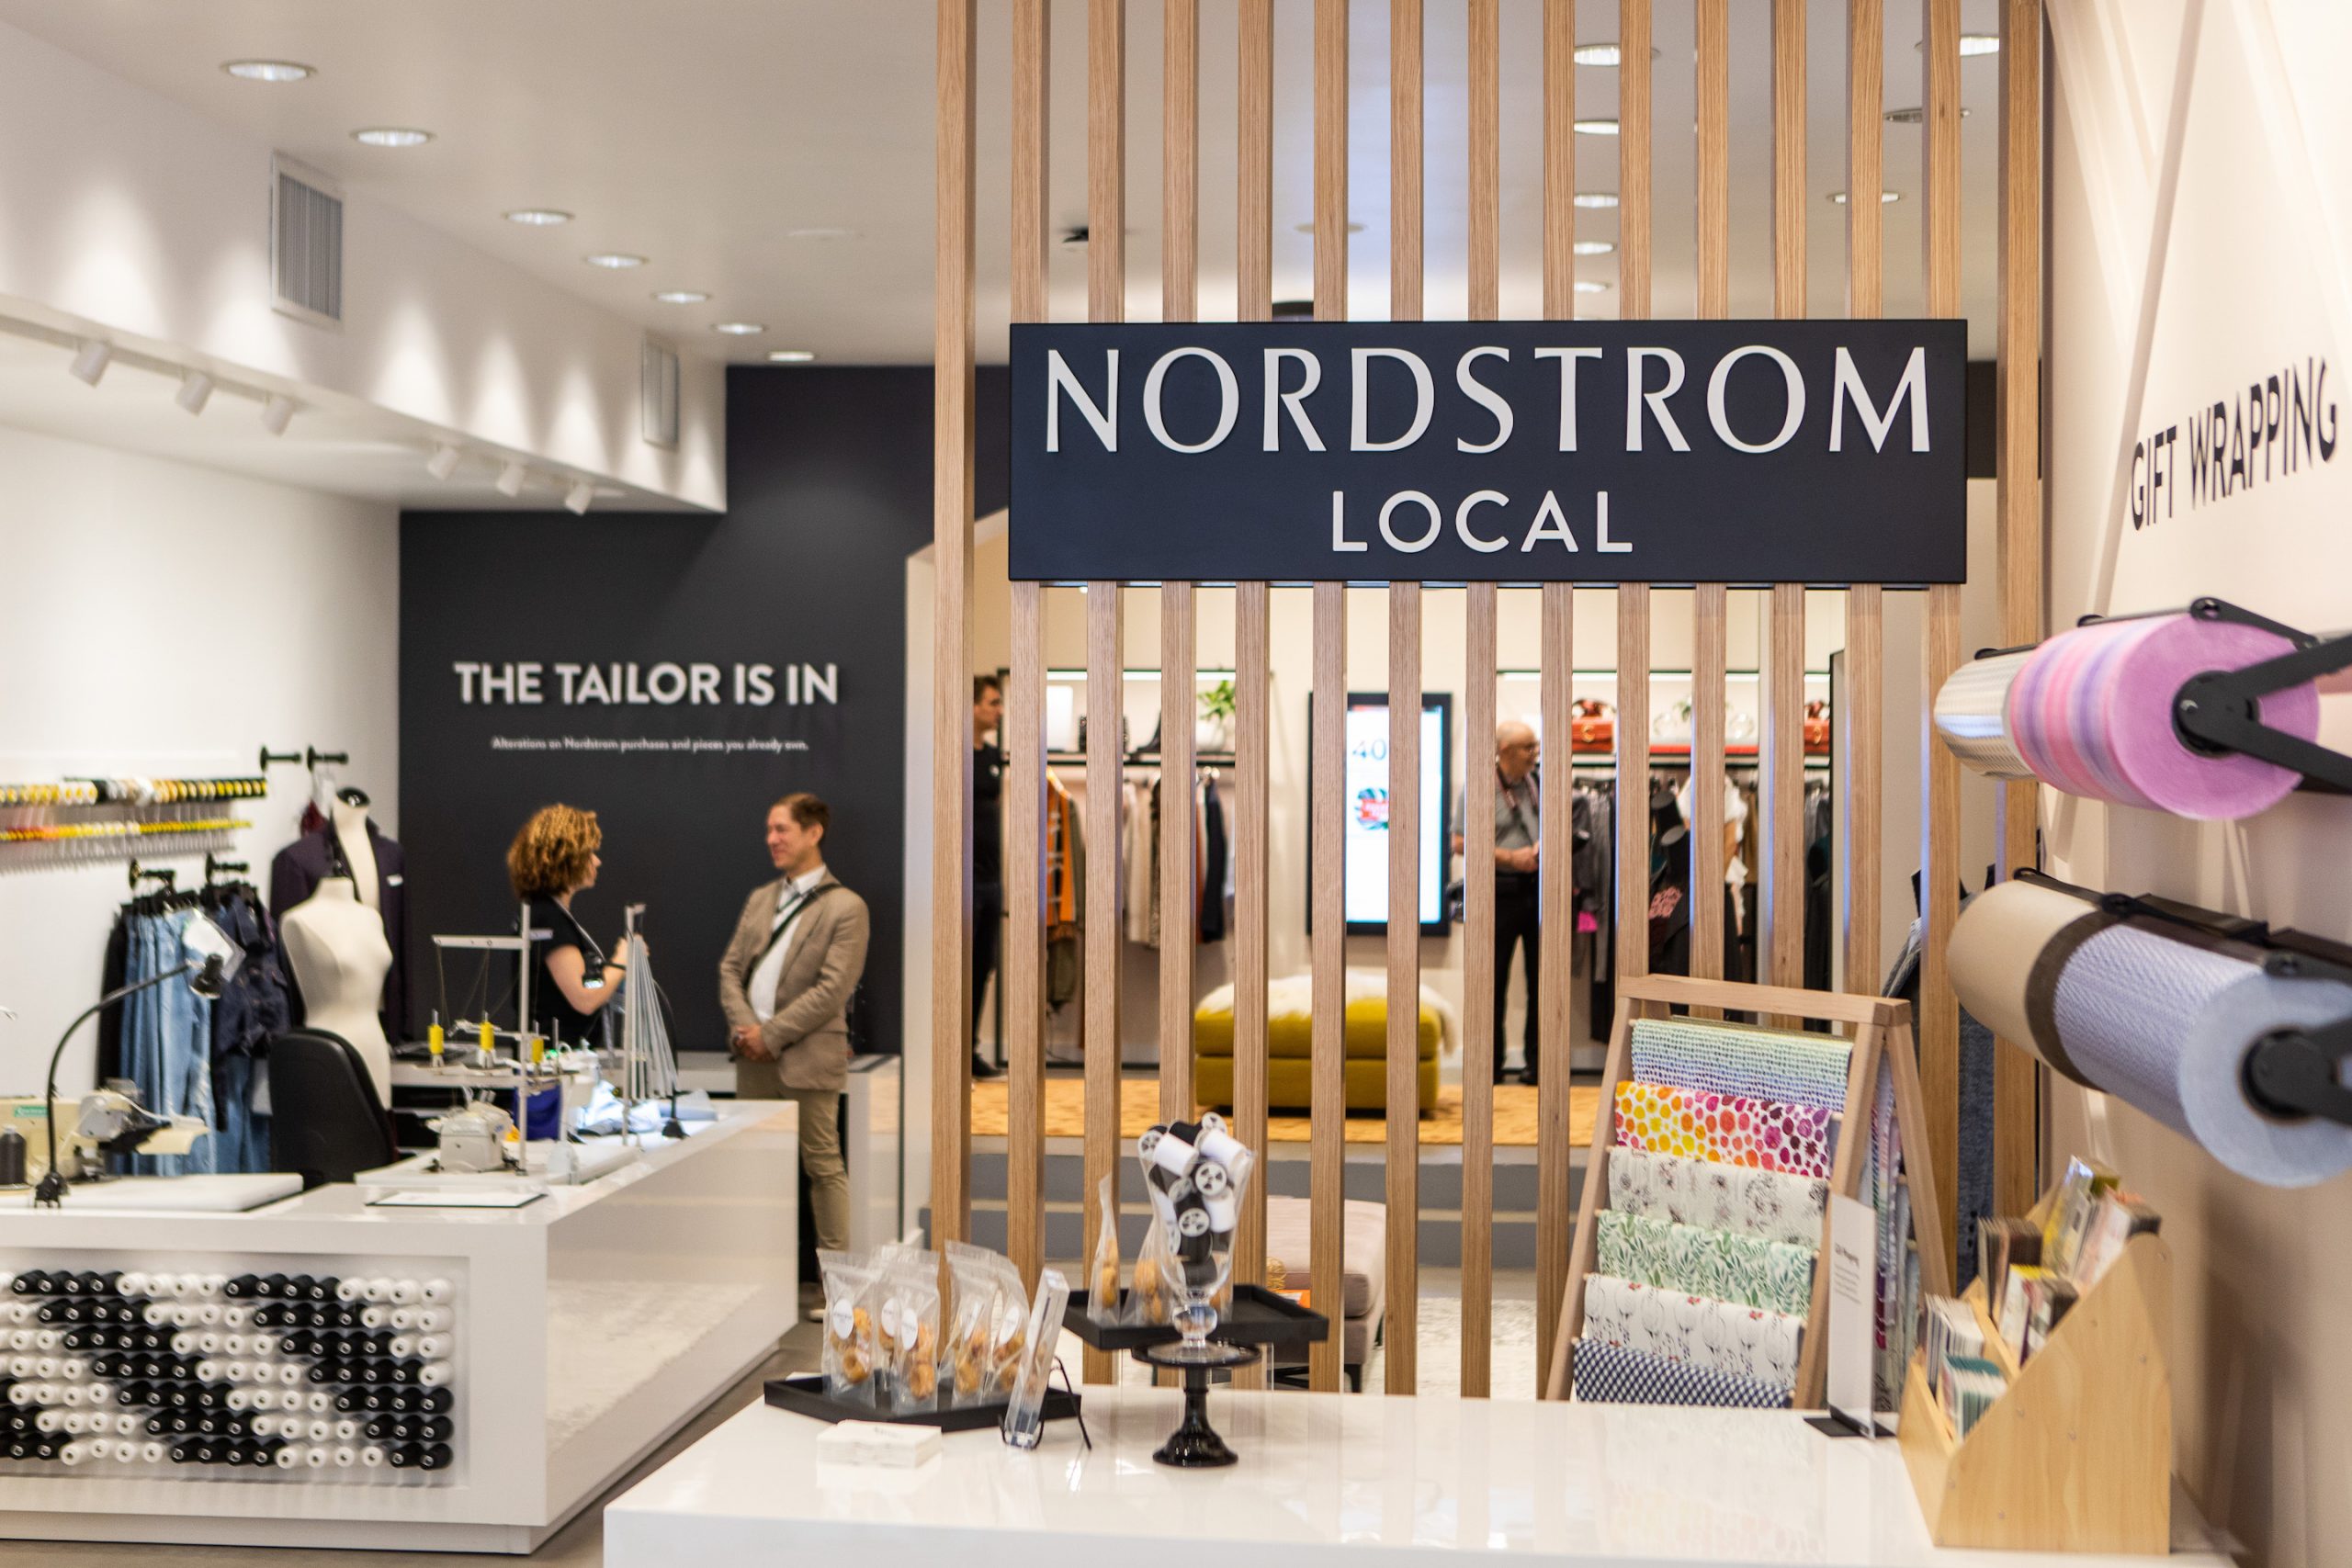 Nordstrom local